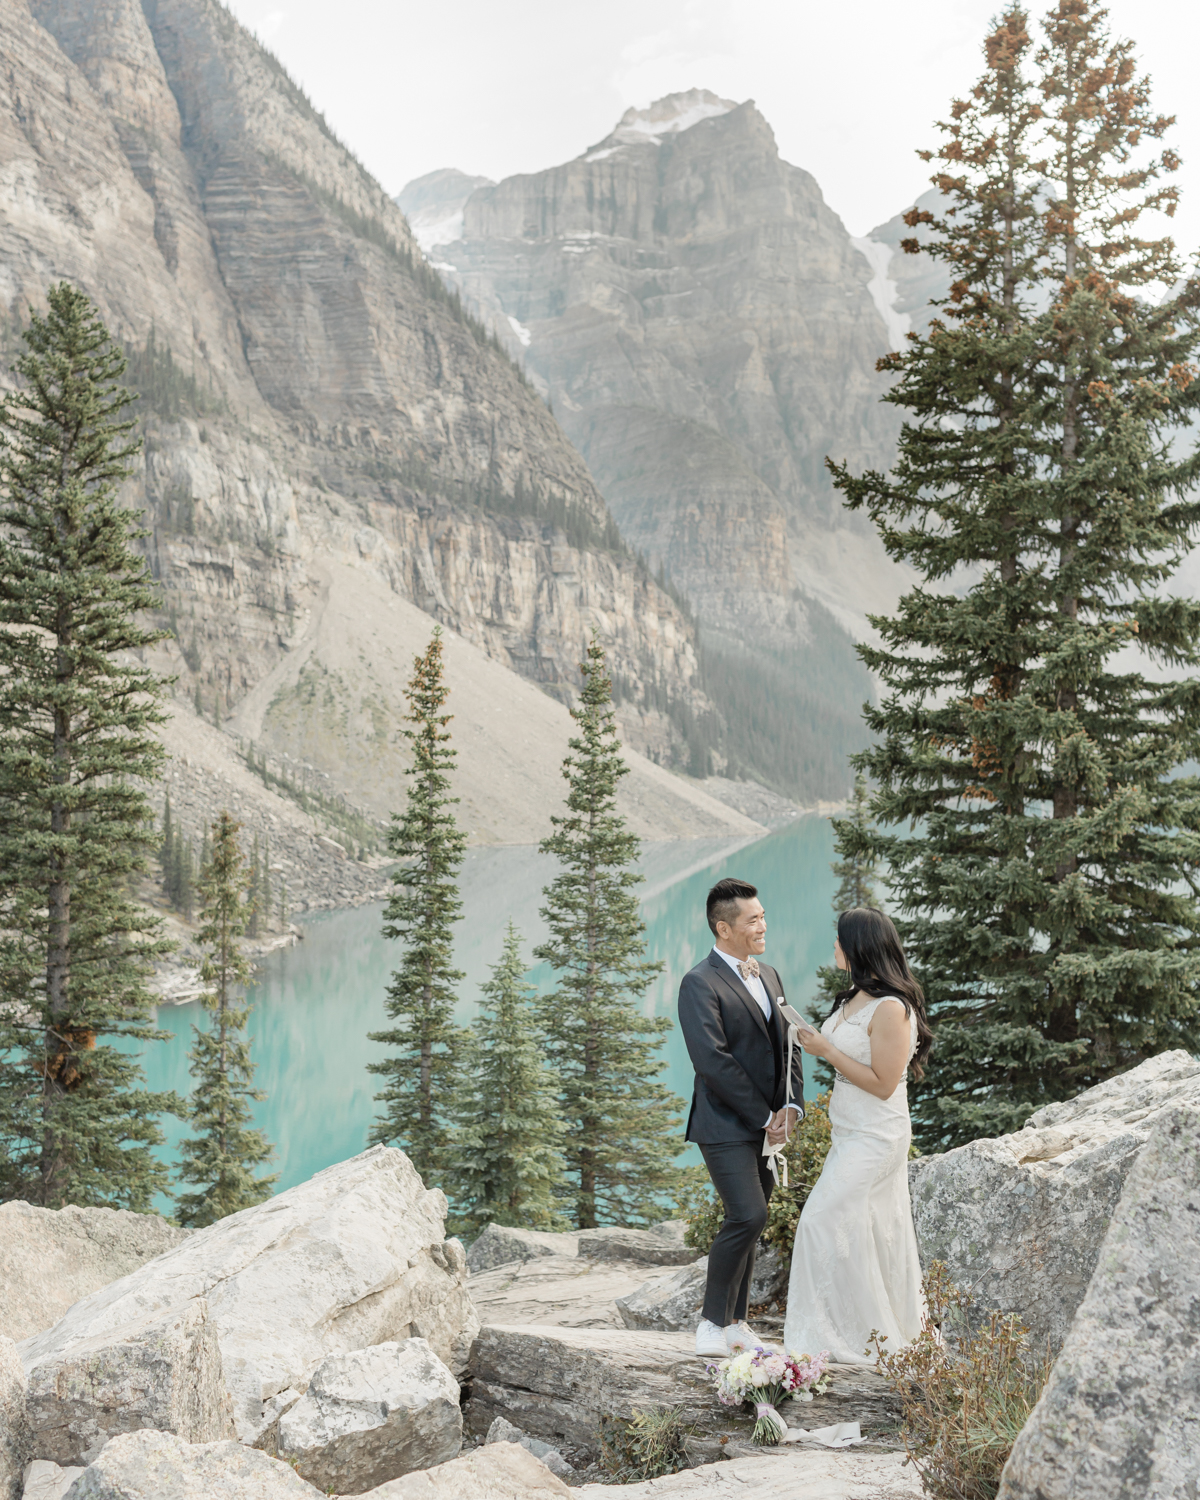 Elopement in Banff National Park couples ceremony 